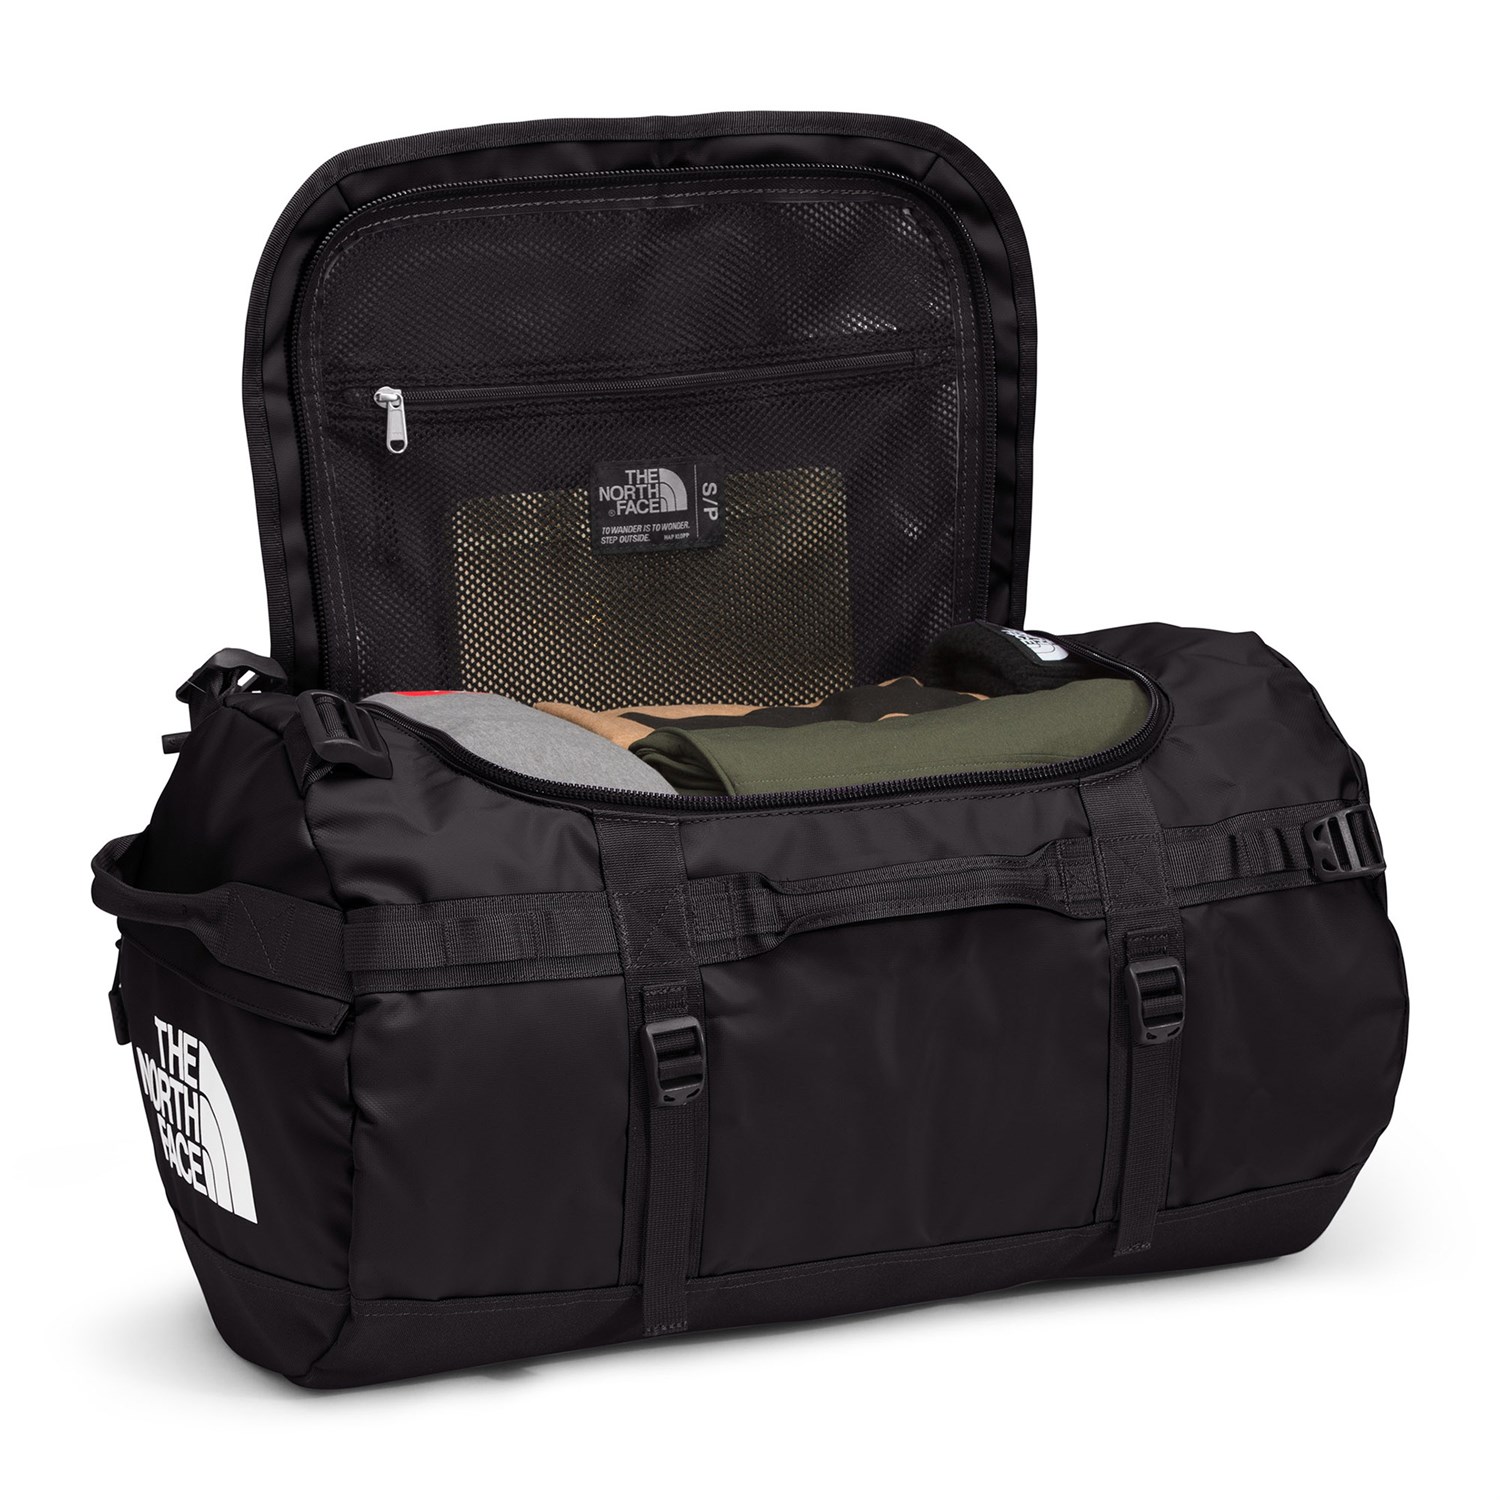 The North Face Base Camp Duffel Bag - Large - 96 Litre – 53